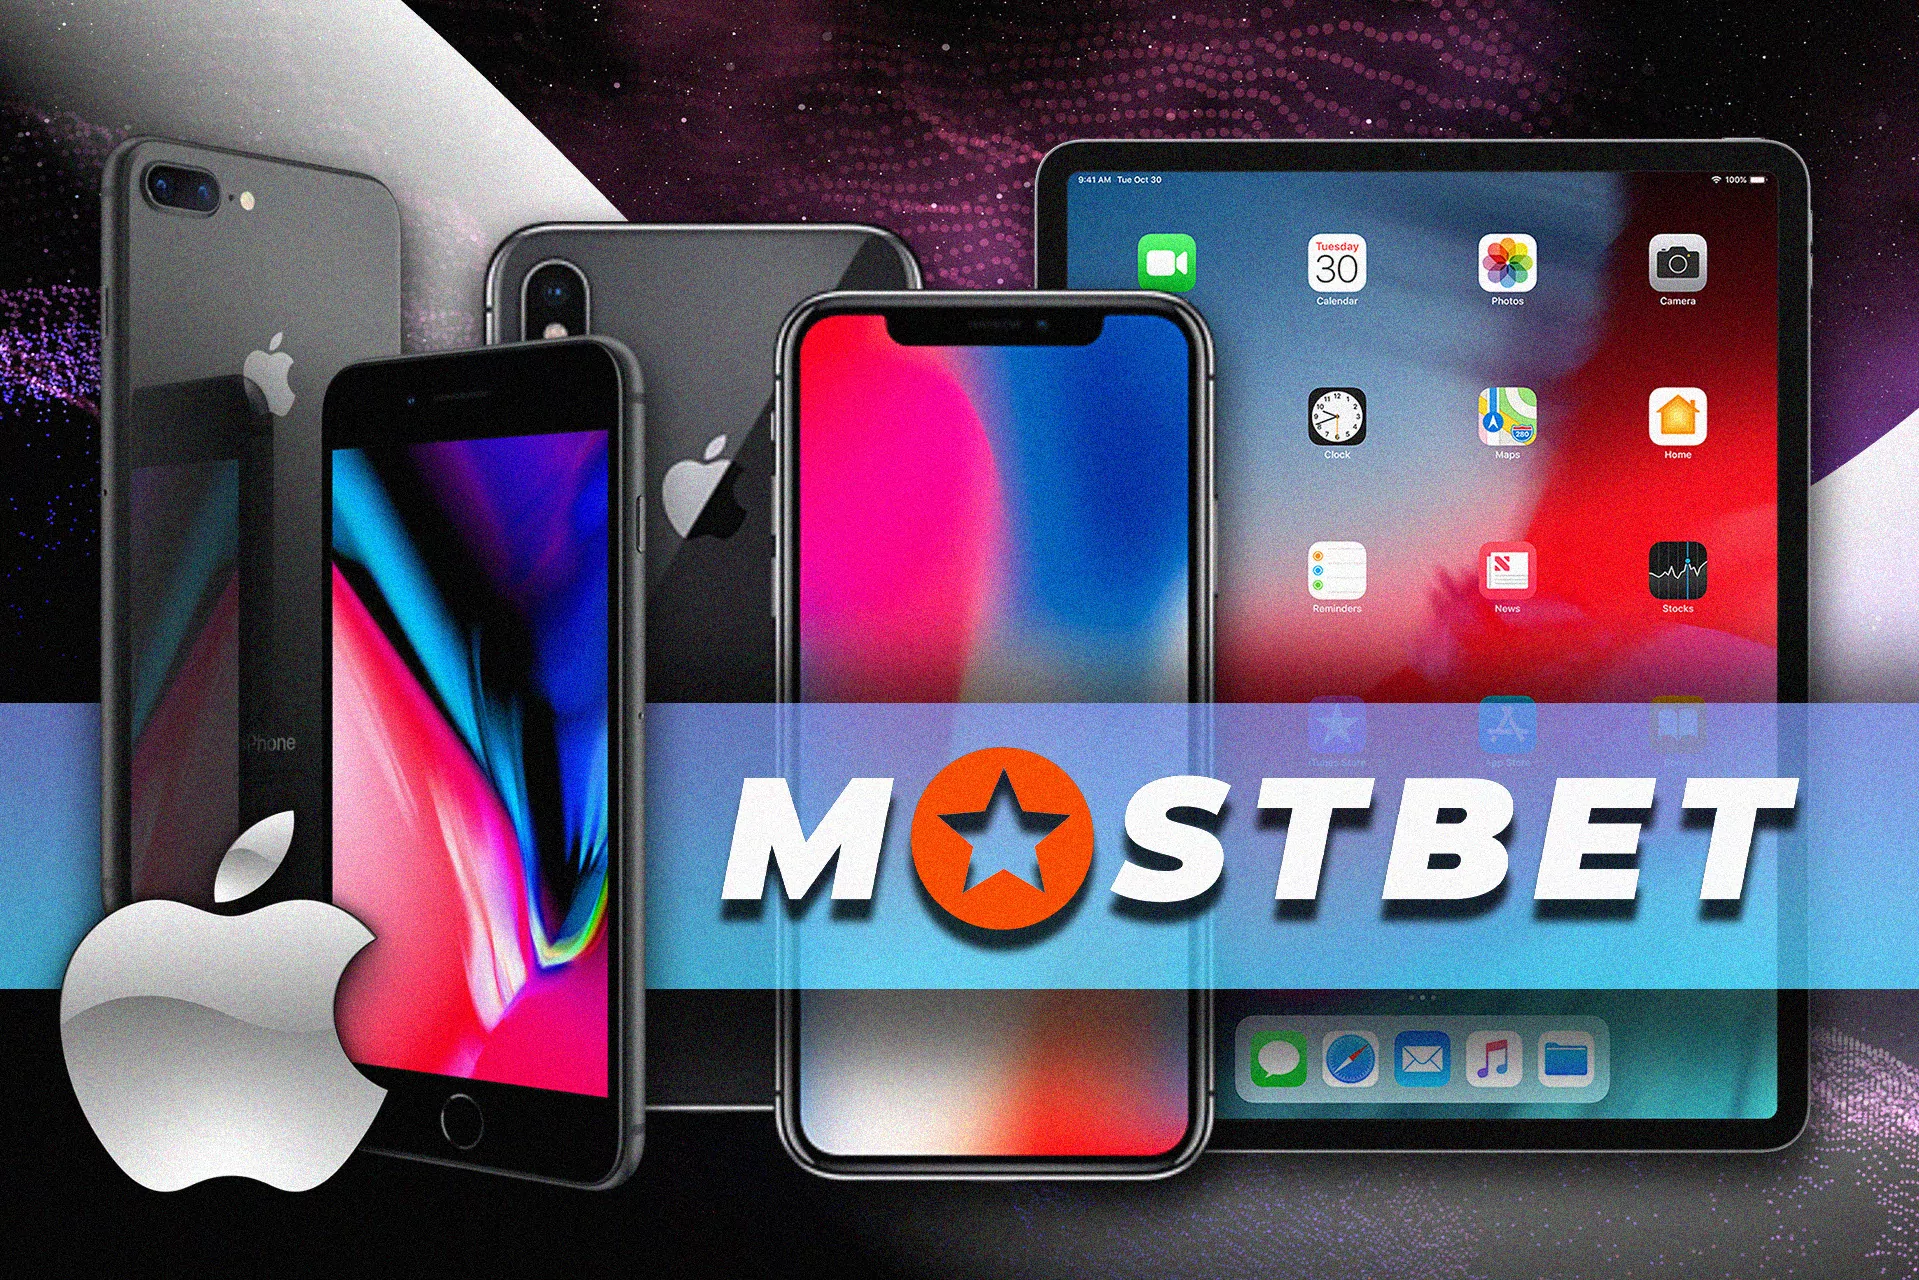 Mostbet app can be installed for free on all the latest iPhone and iPad models.